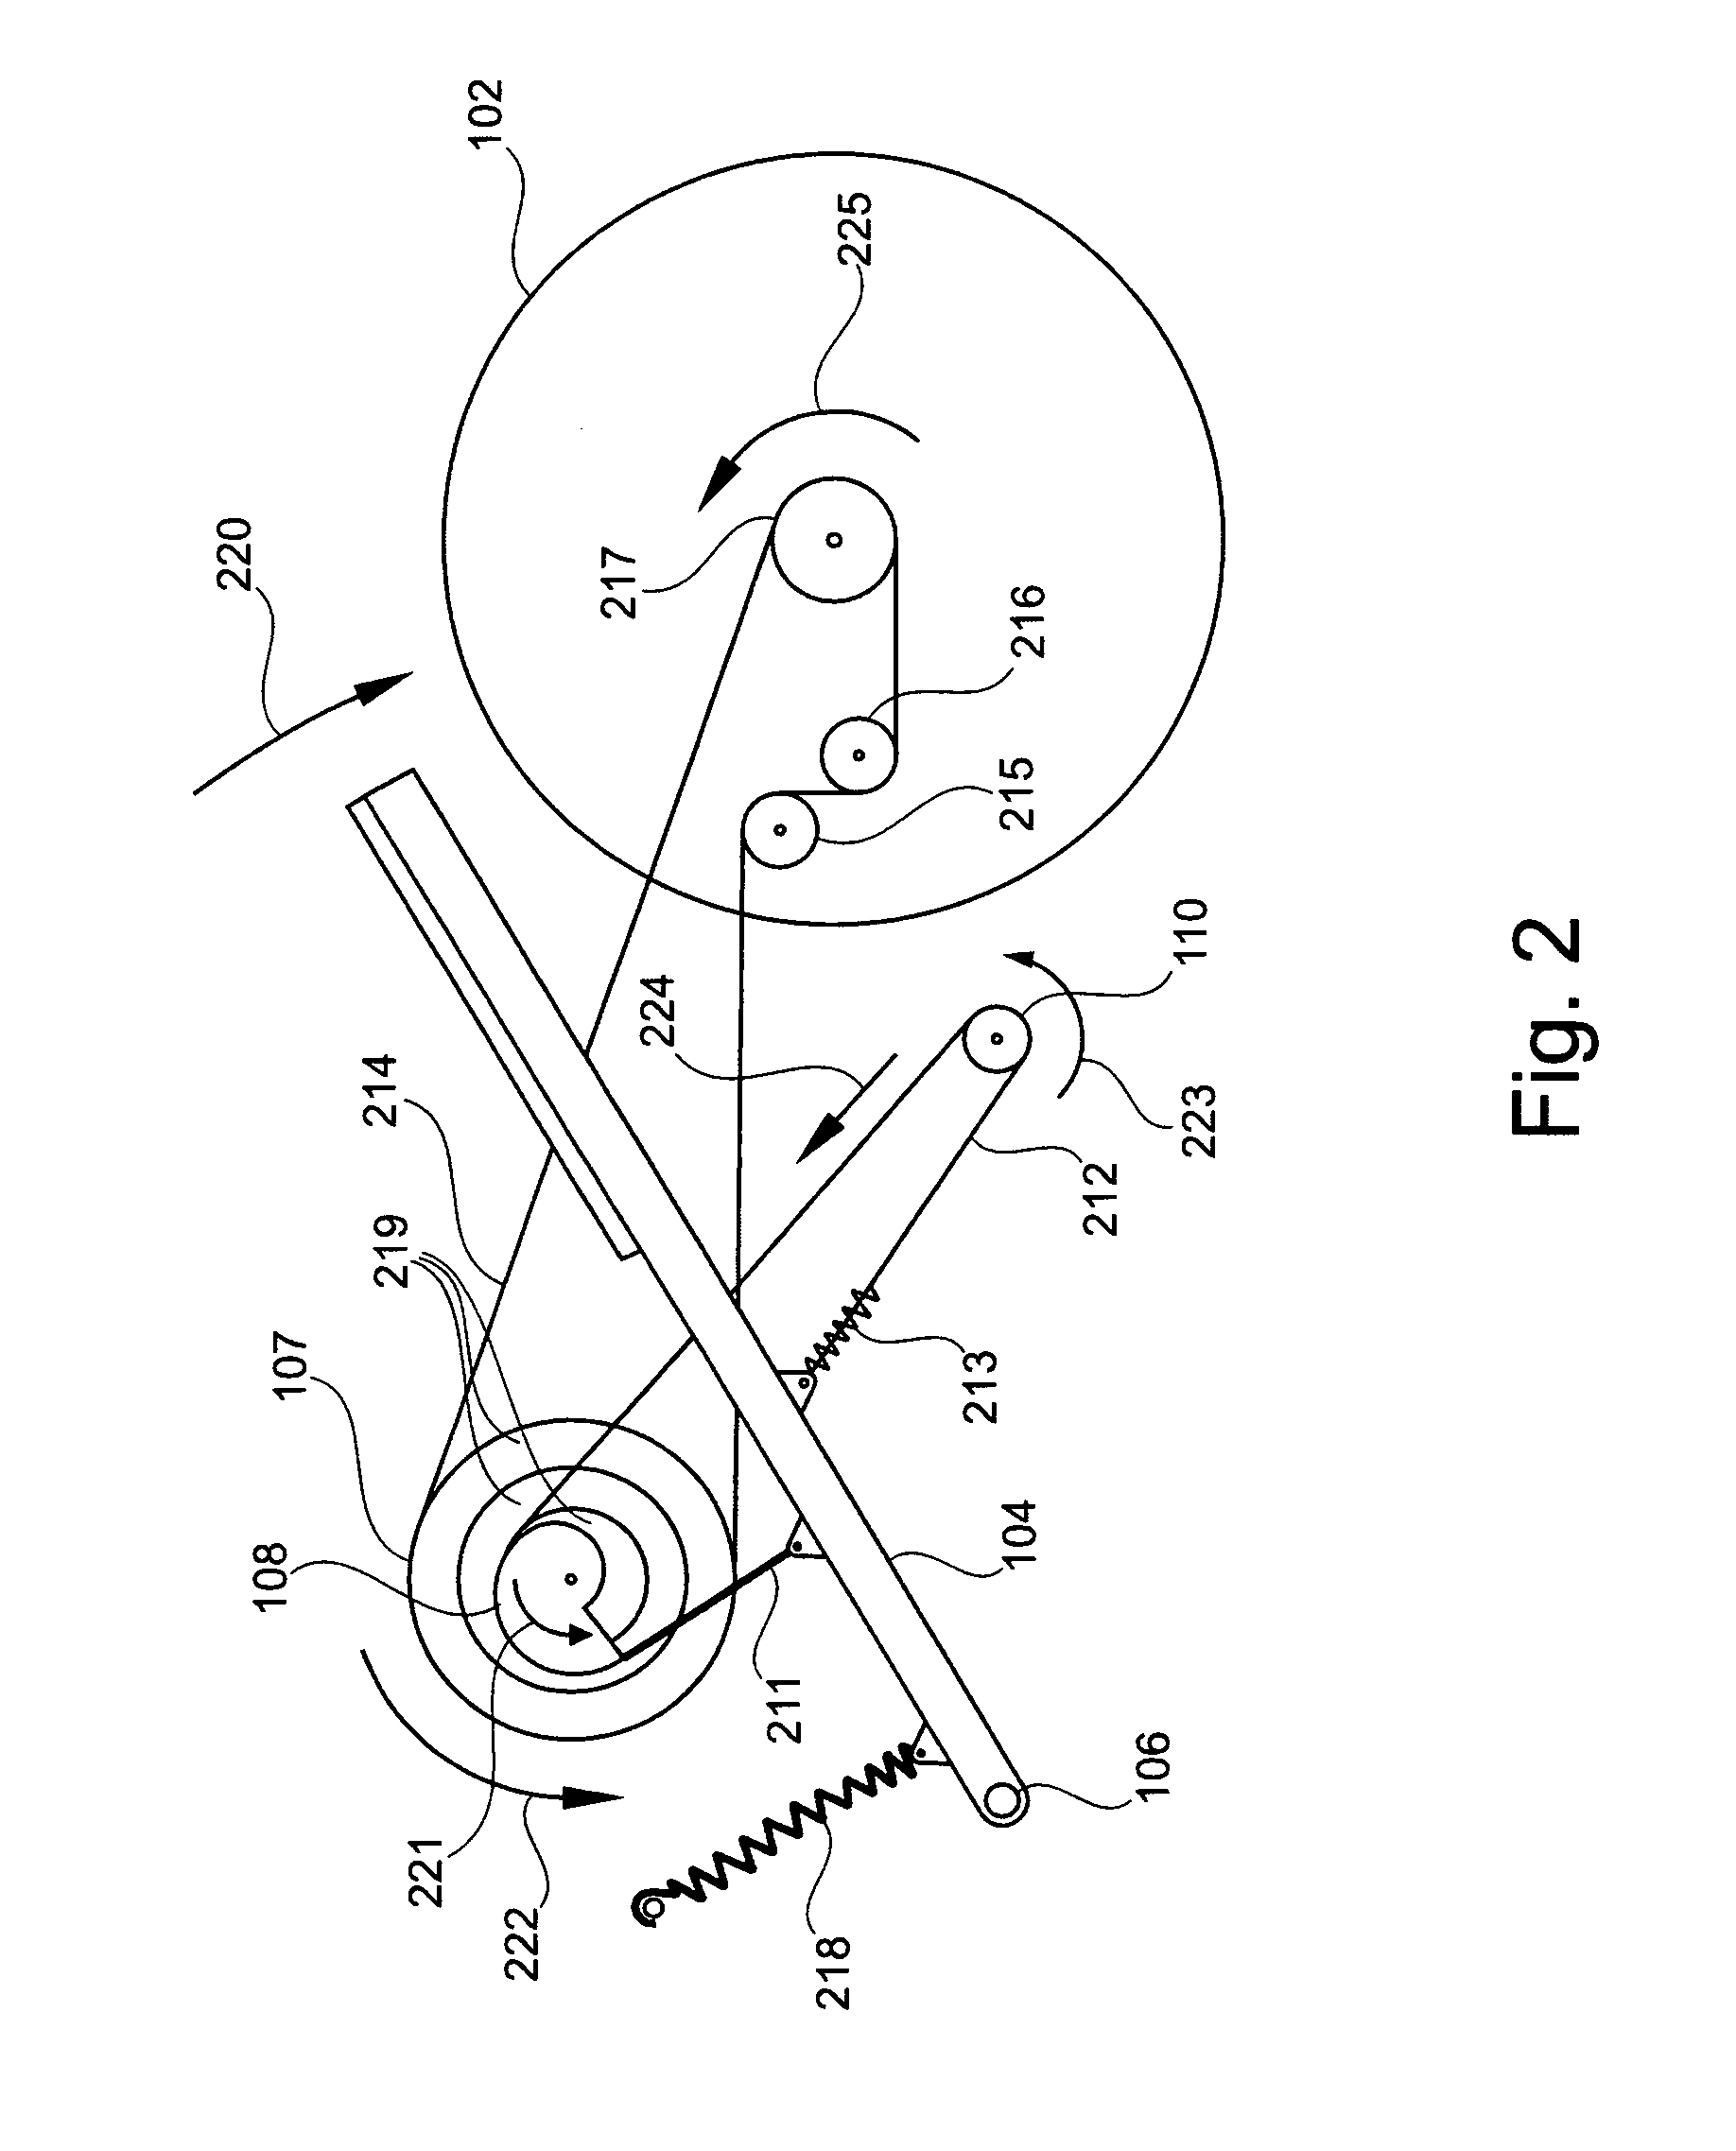 Drive Mechanism for a Vehicle Propellable by Muscle Power and Vehicle